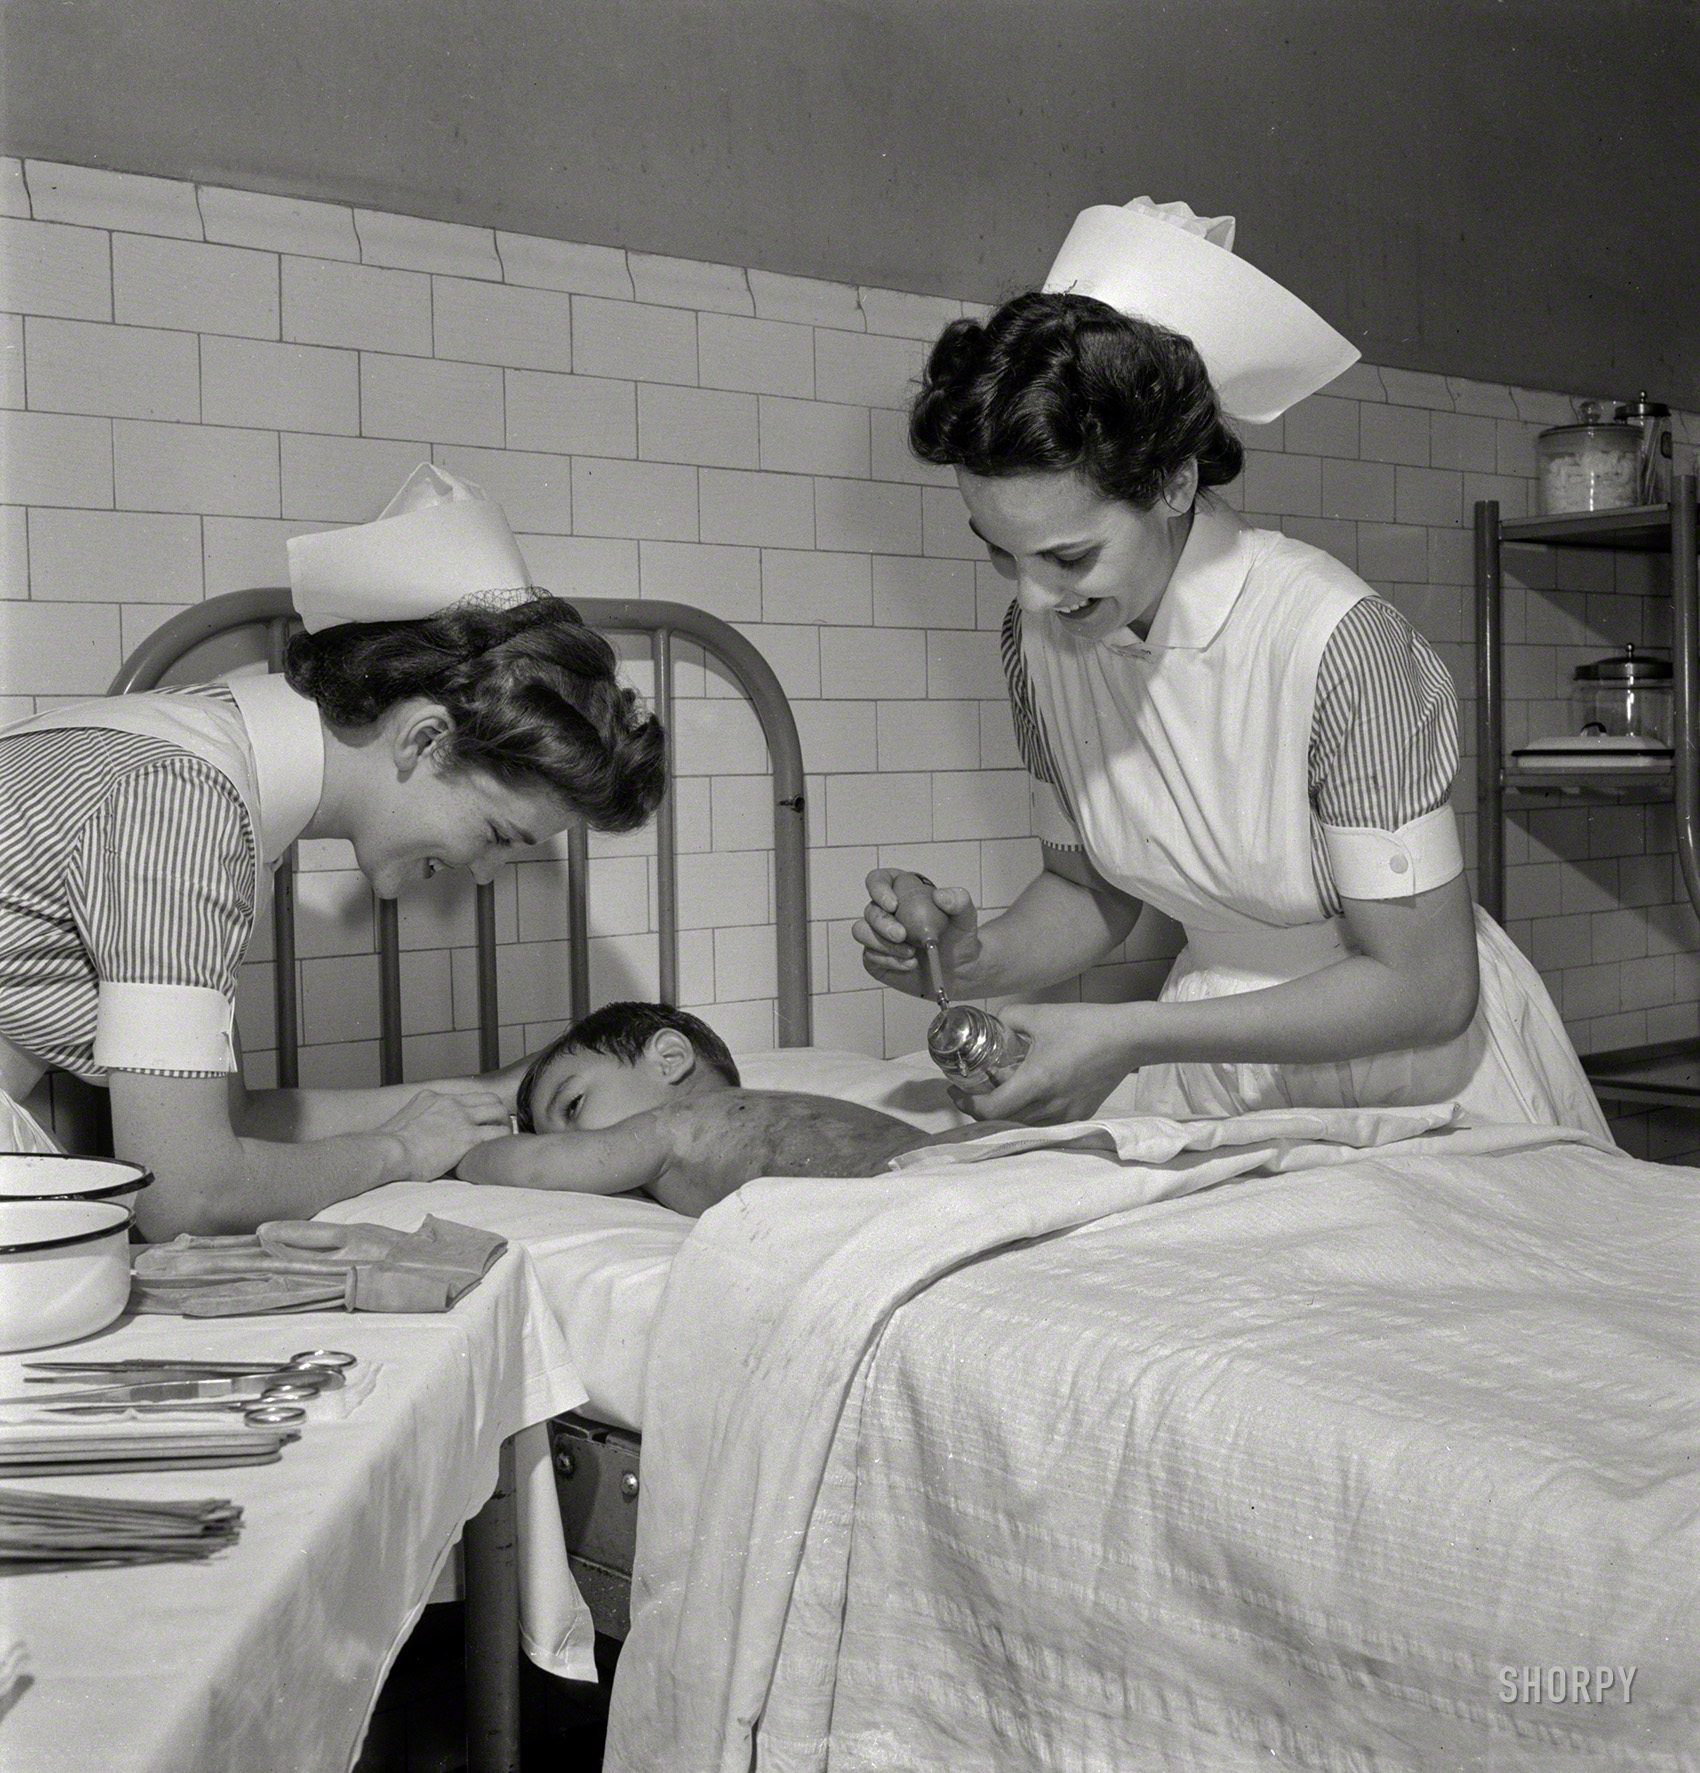 November 1942. Babies' Hospital, New York. "Nurse training. Nurses learn the care of patients suffering from burns. Here, the nurse paints a boy's burned back with sulfathiazole. The treatment of burns is of much public interest in these days of warfare on civilian populations with incendiary bombs." Medium format nitrate negative by Fritz Henle for the Office of War Information. View full size.